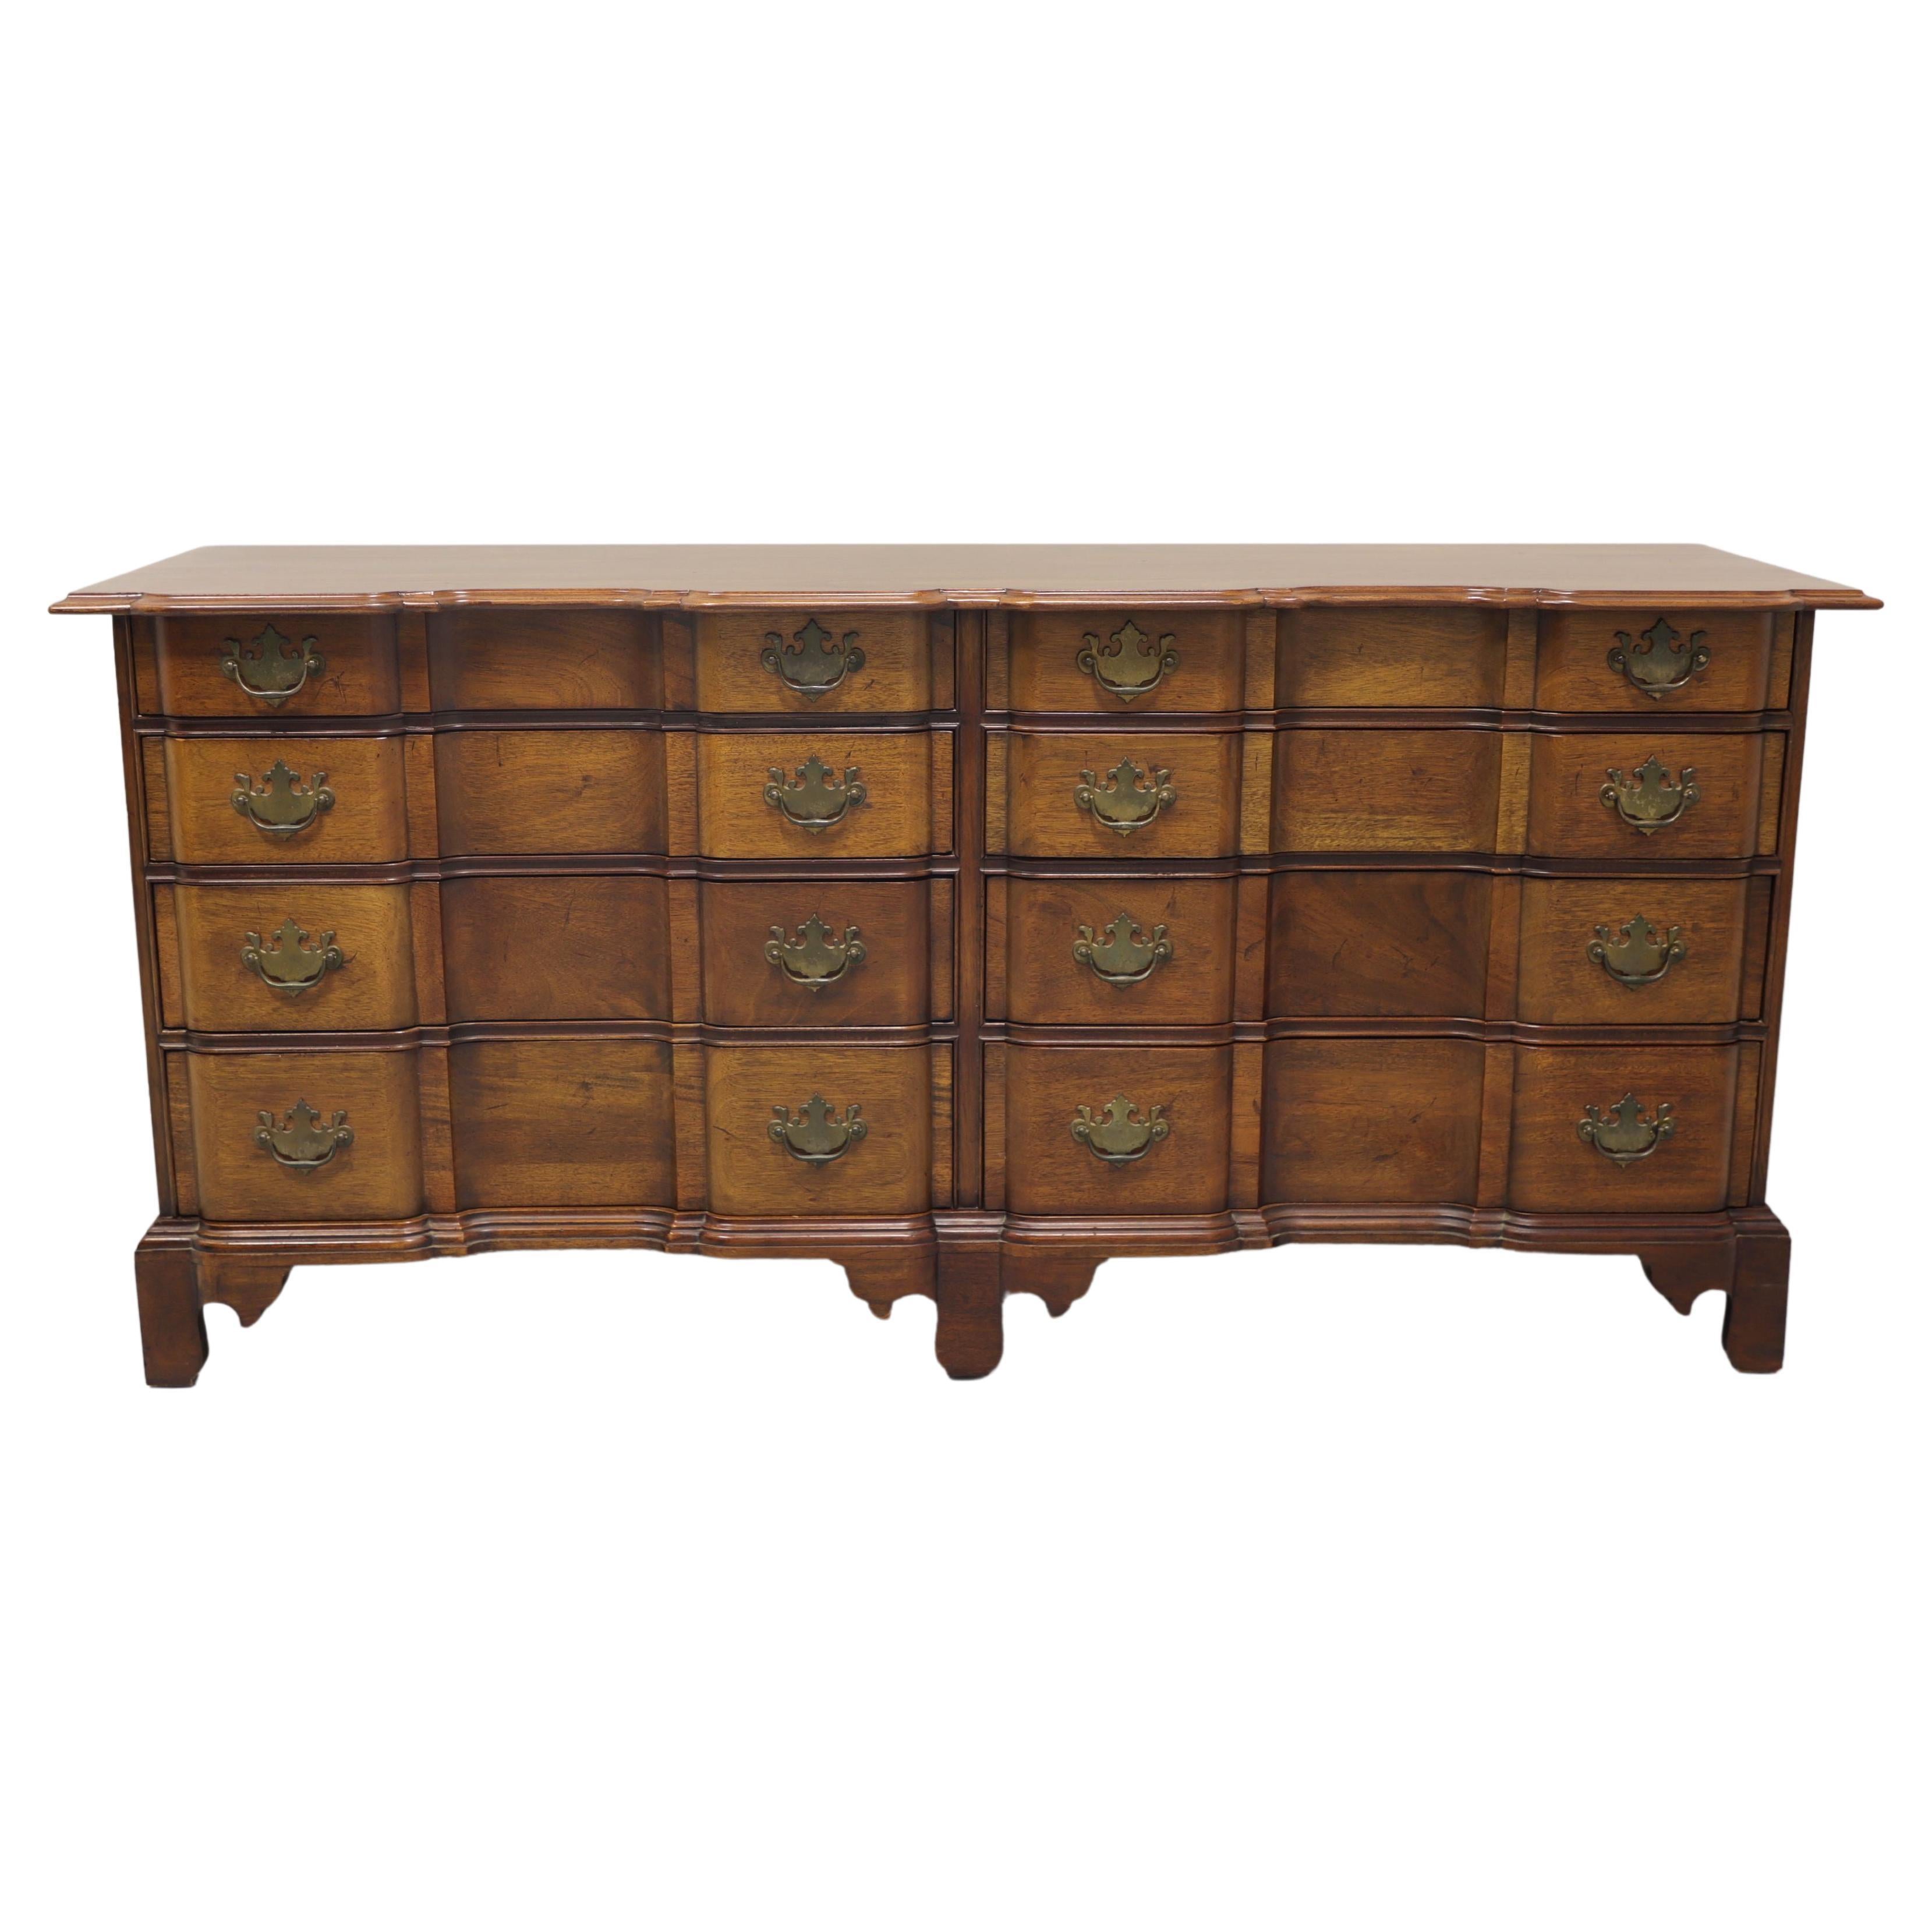 CENTURY Mahogany Block Front Double Dresser - "The Henry Ford Museum" Collection